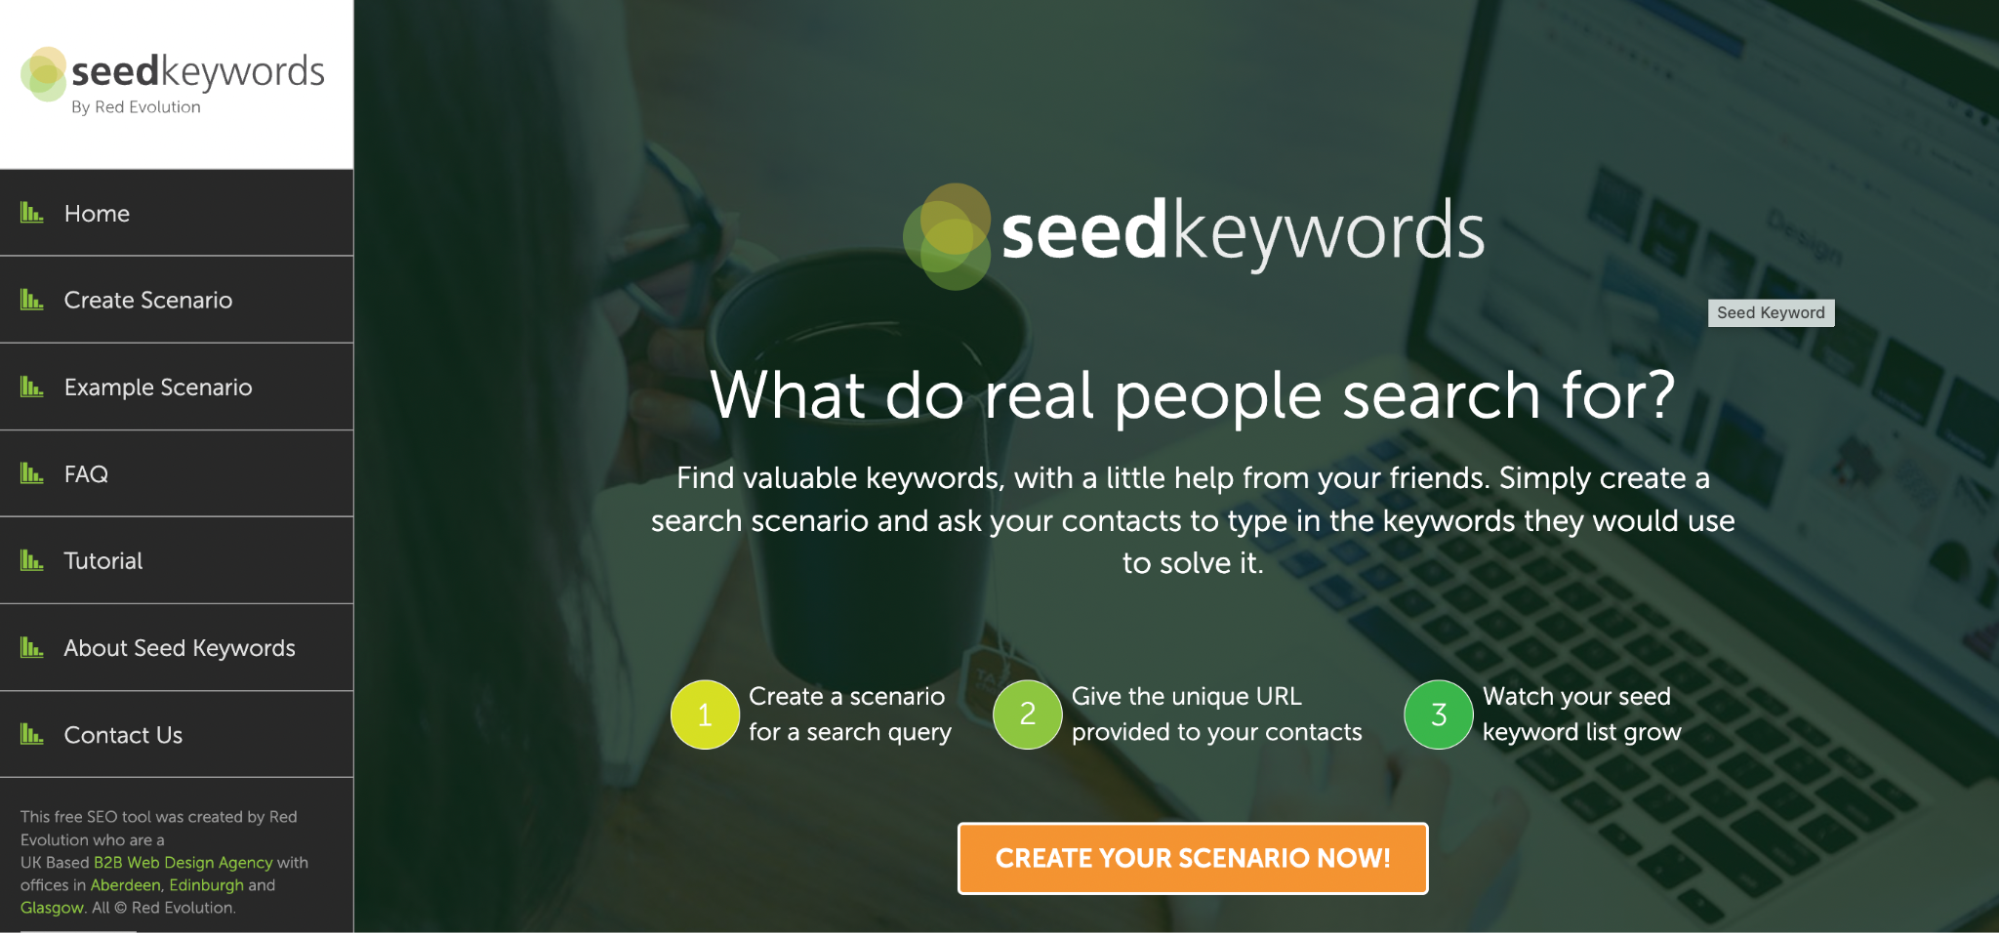 Seed Keywords homepage on a green transparent background